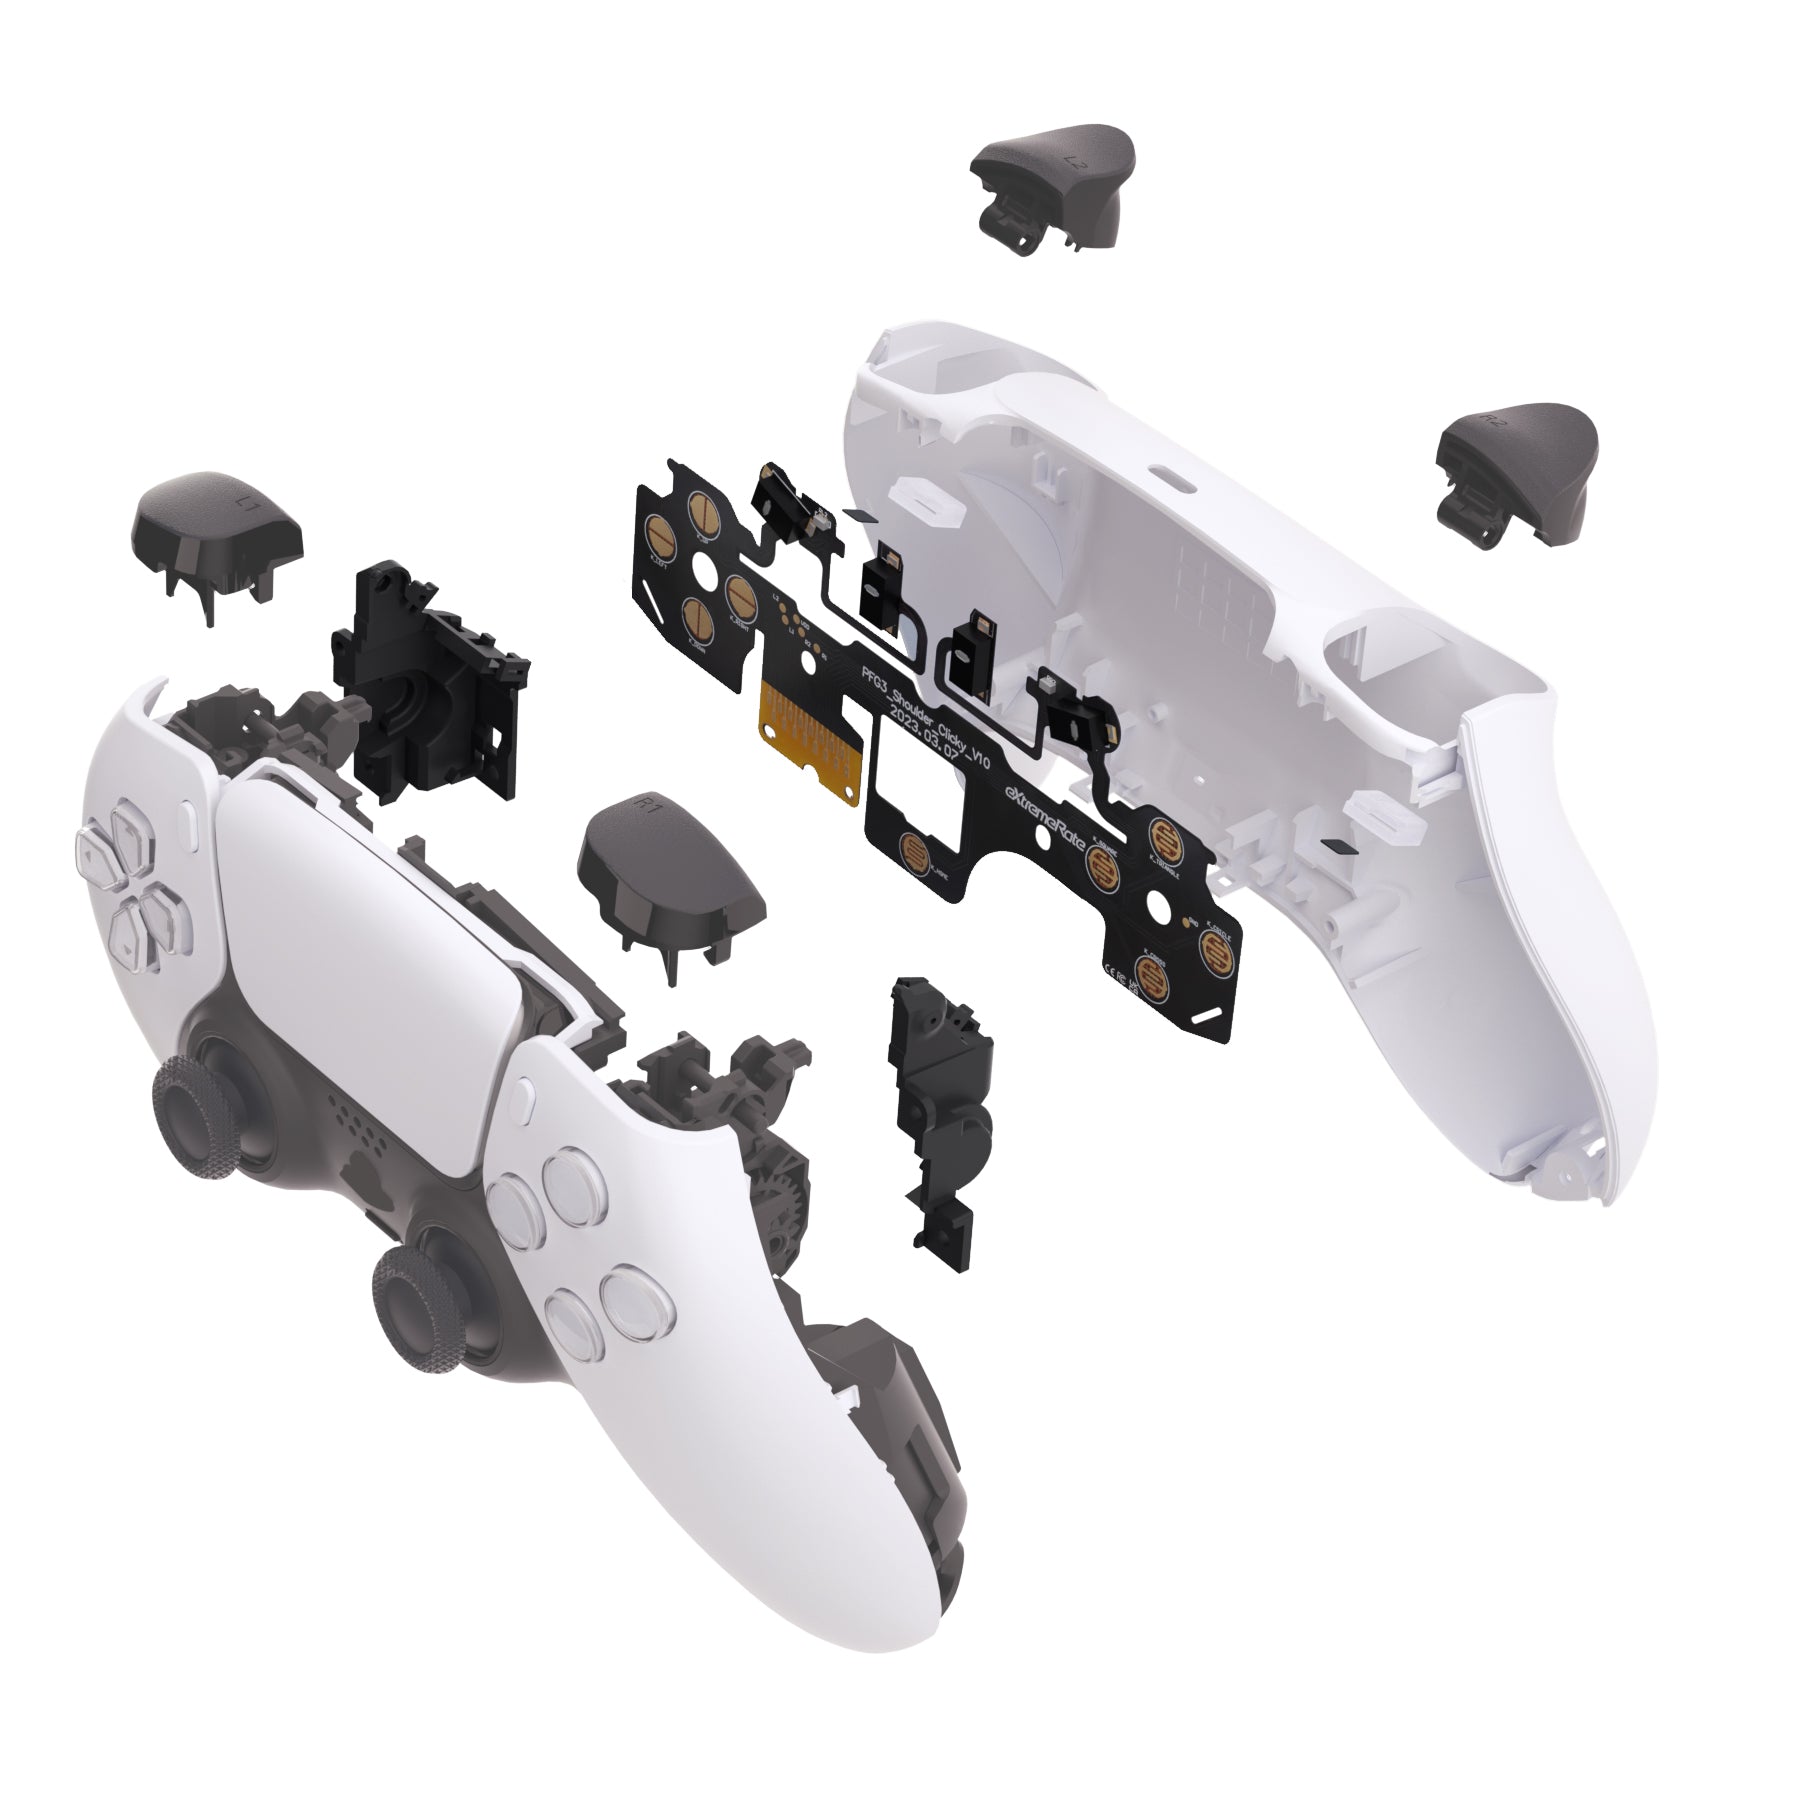 eXtremeRate Retail Shoulder Buttons Micro Switch - Strong Version Clicky Hair Trigger Kit For PS5 Controller BDM-030